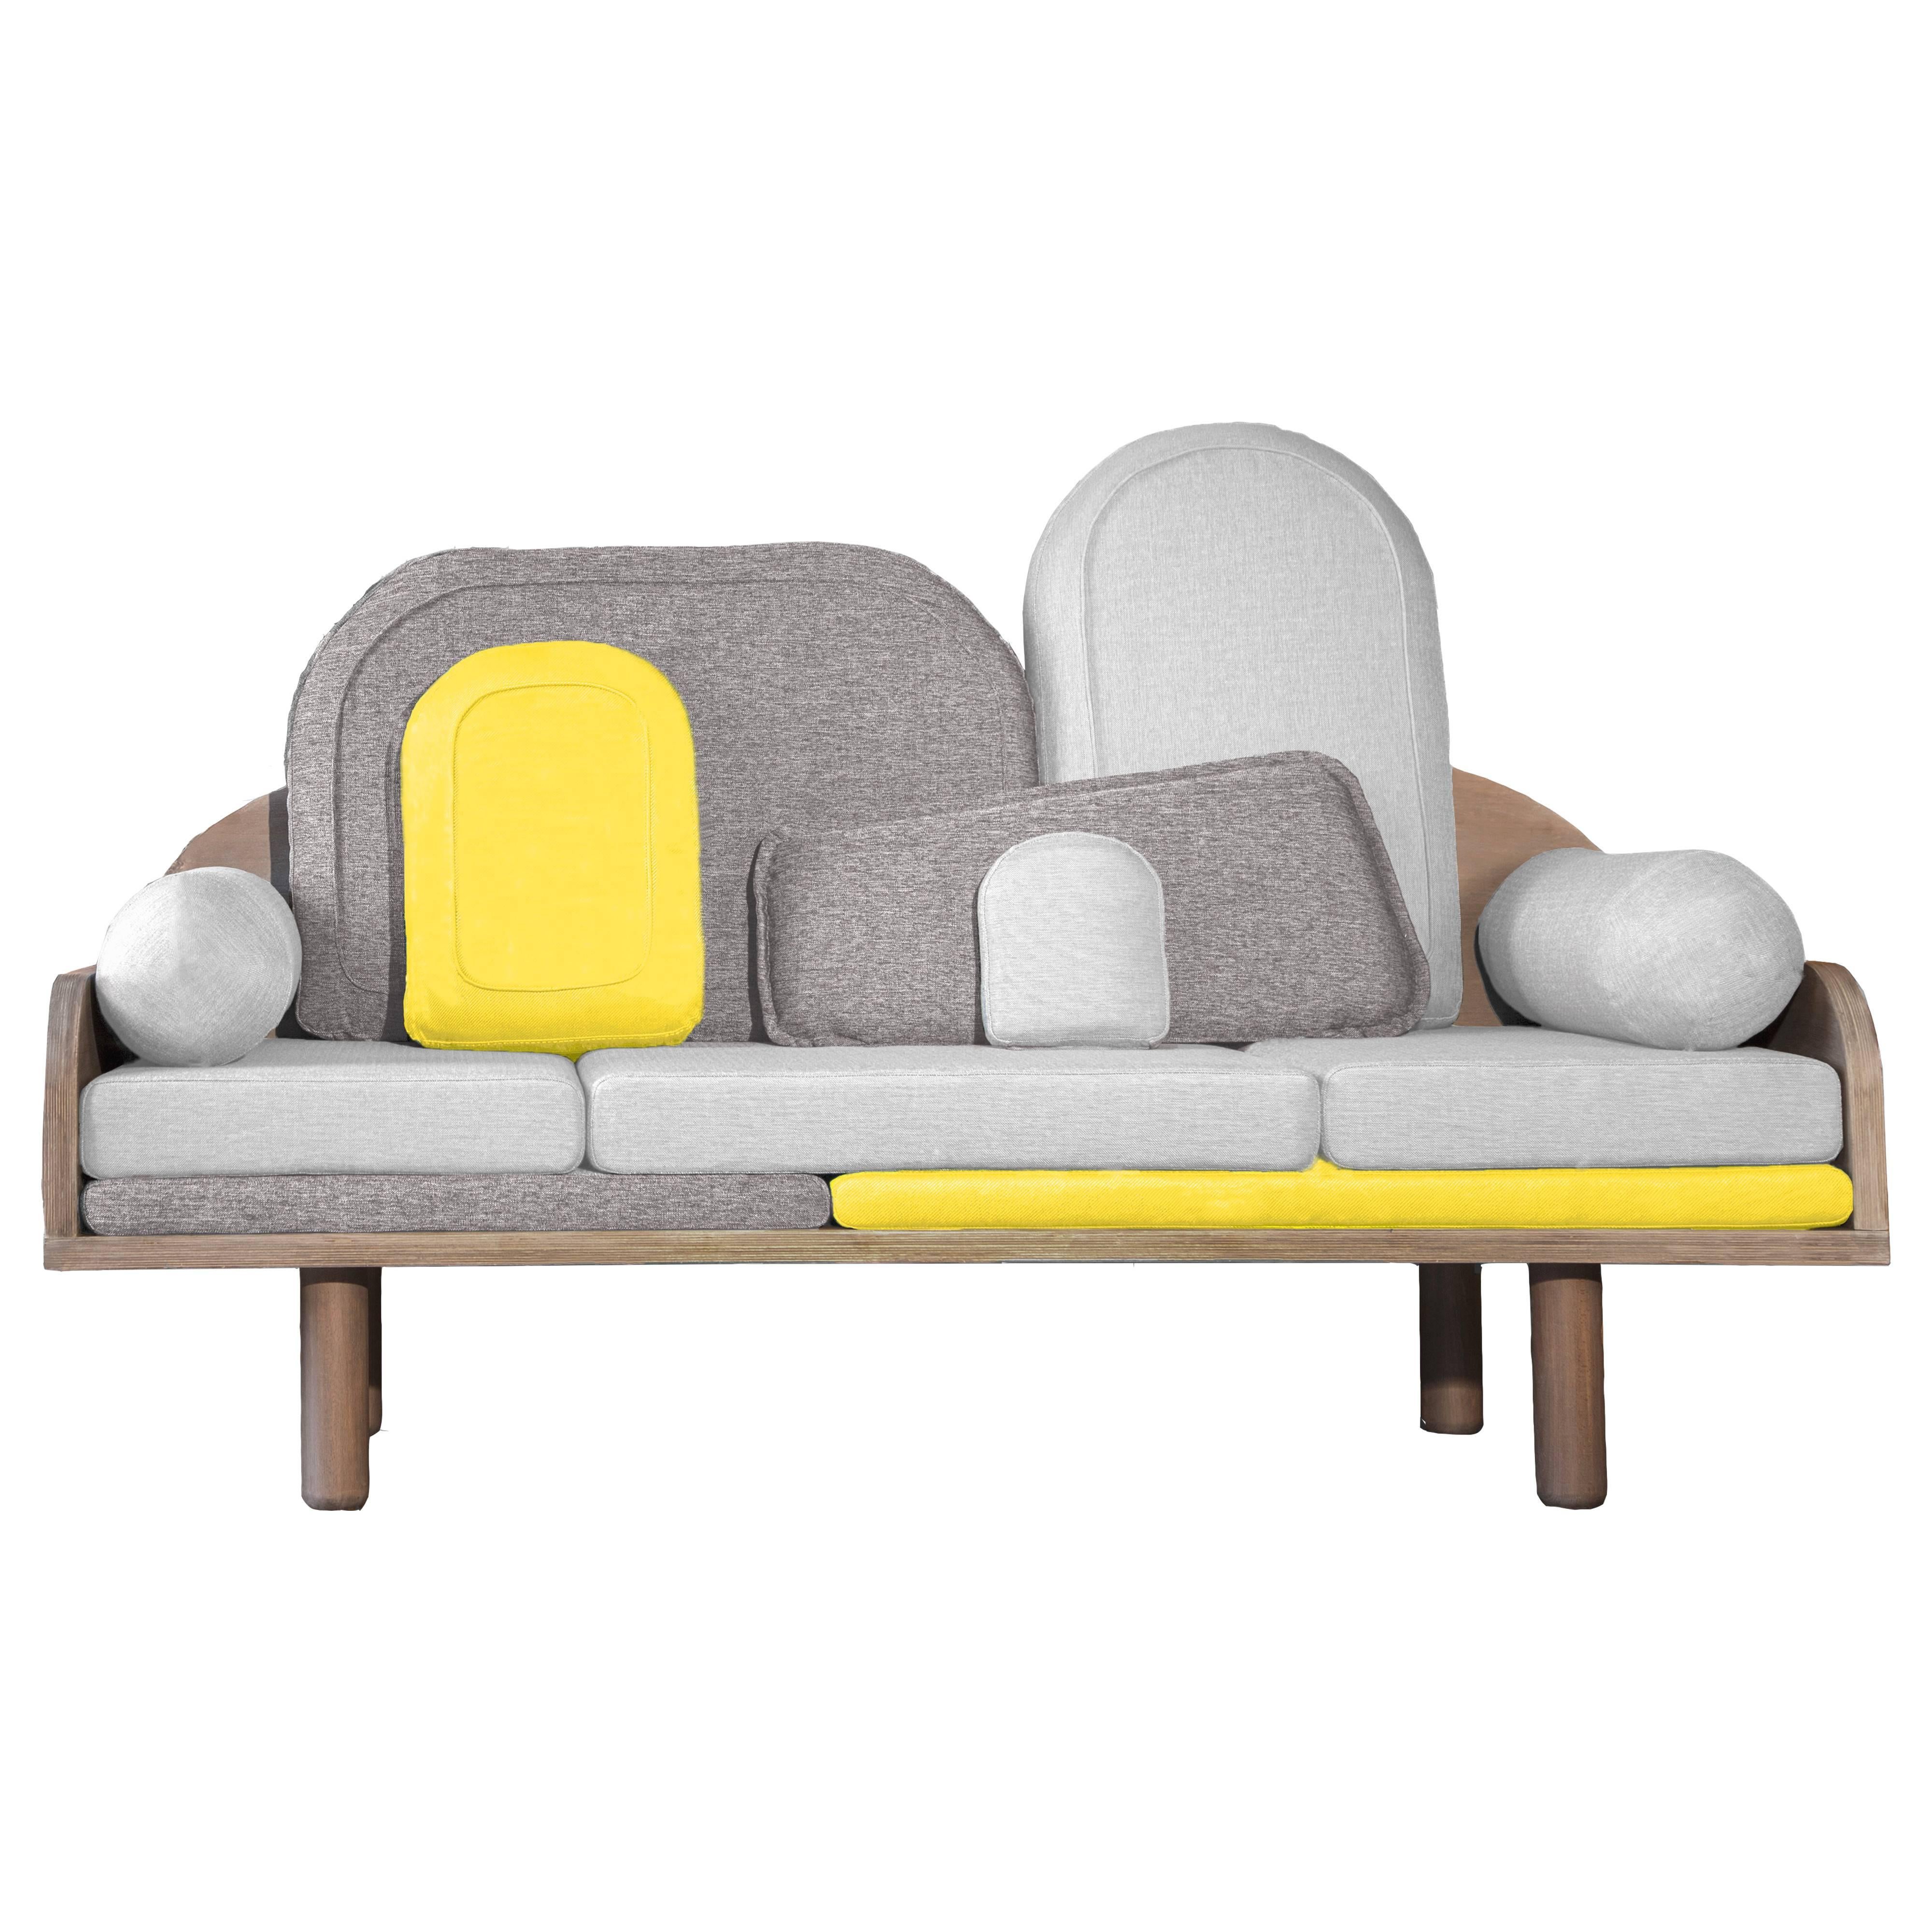 Couchino is an abundance of cushions with various size and colors with a comfortable seat.
Move the cushions to adapt your position.
Make it unique by choosing the shade of the wood and fabric colour from six possibilities or more on demand.

Made